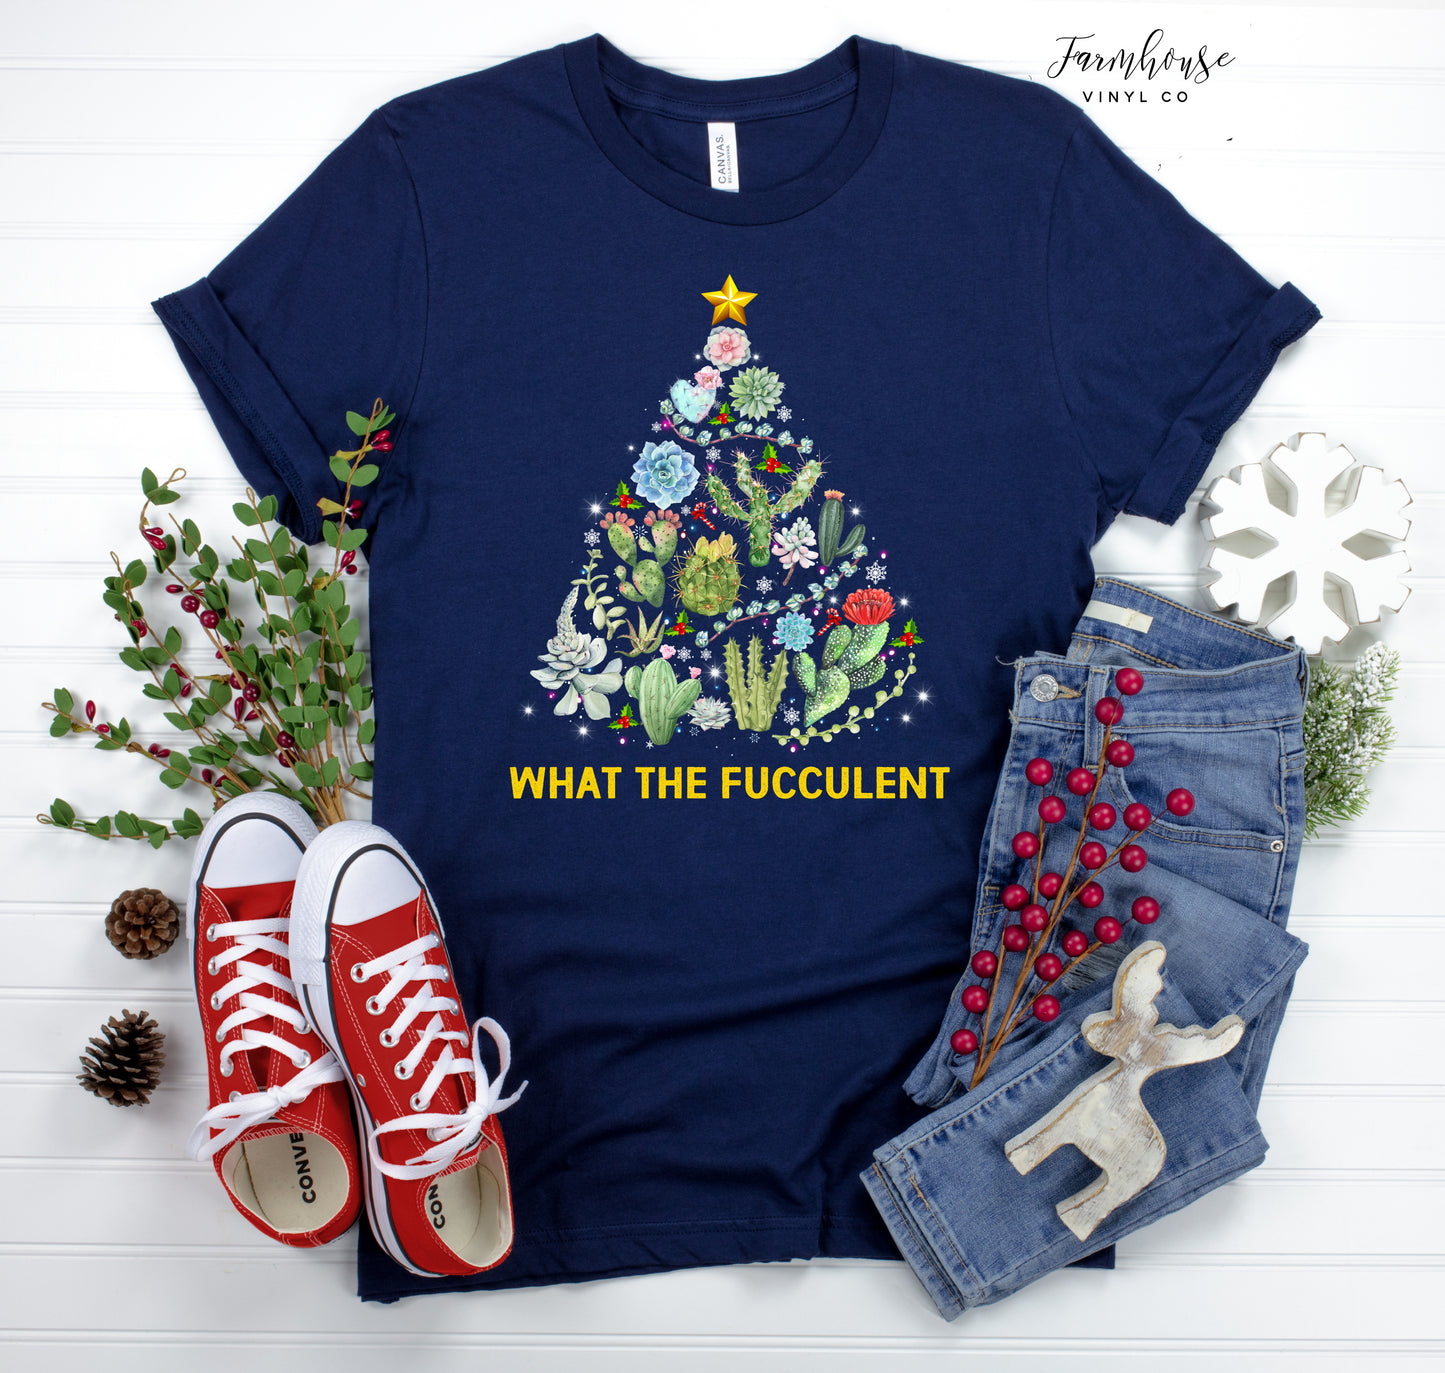 What the Fucculent? Succulent Clothing Collection